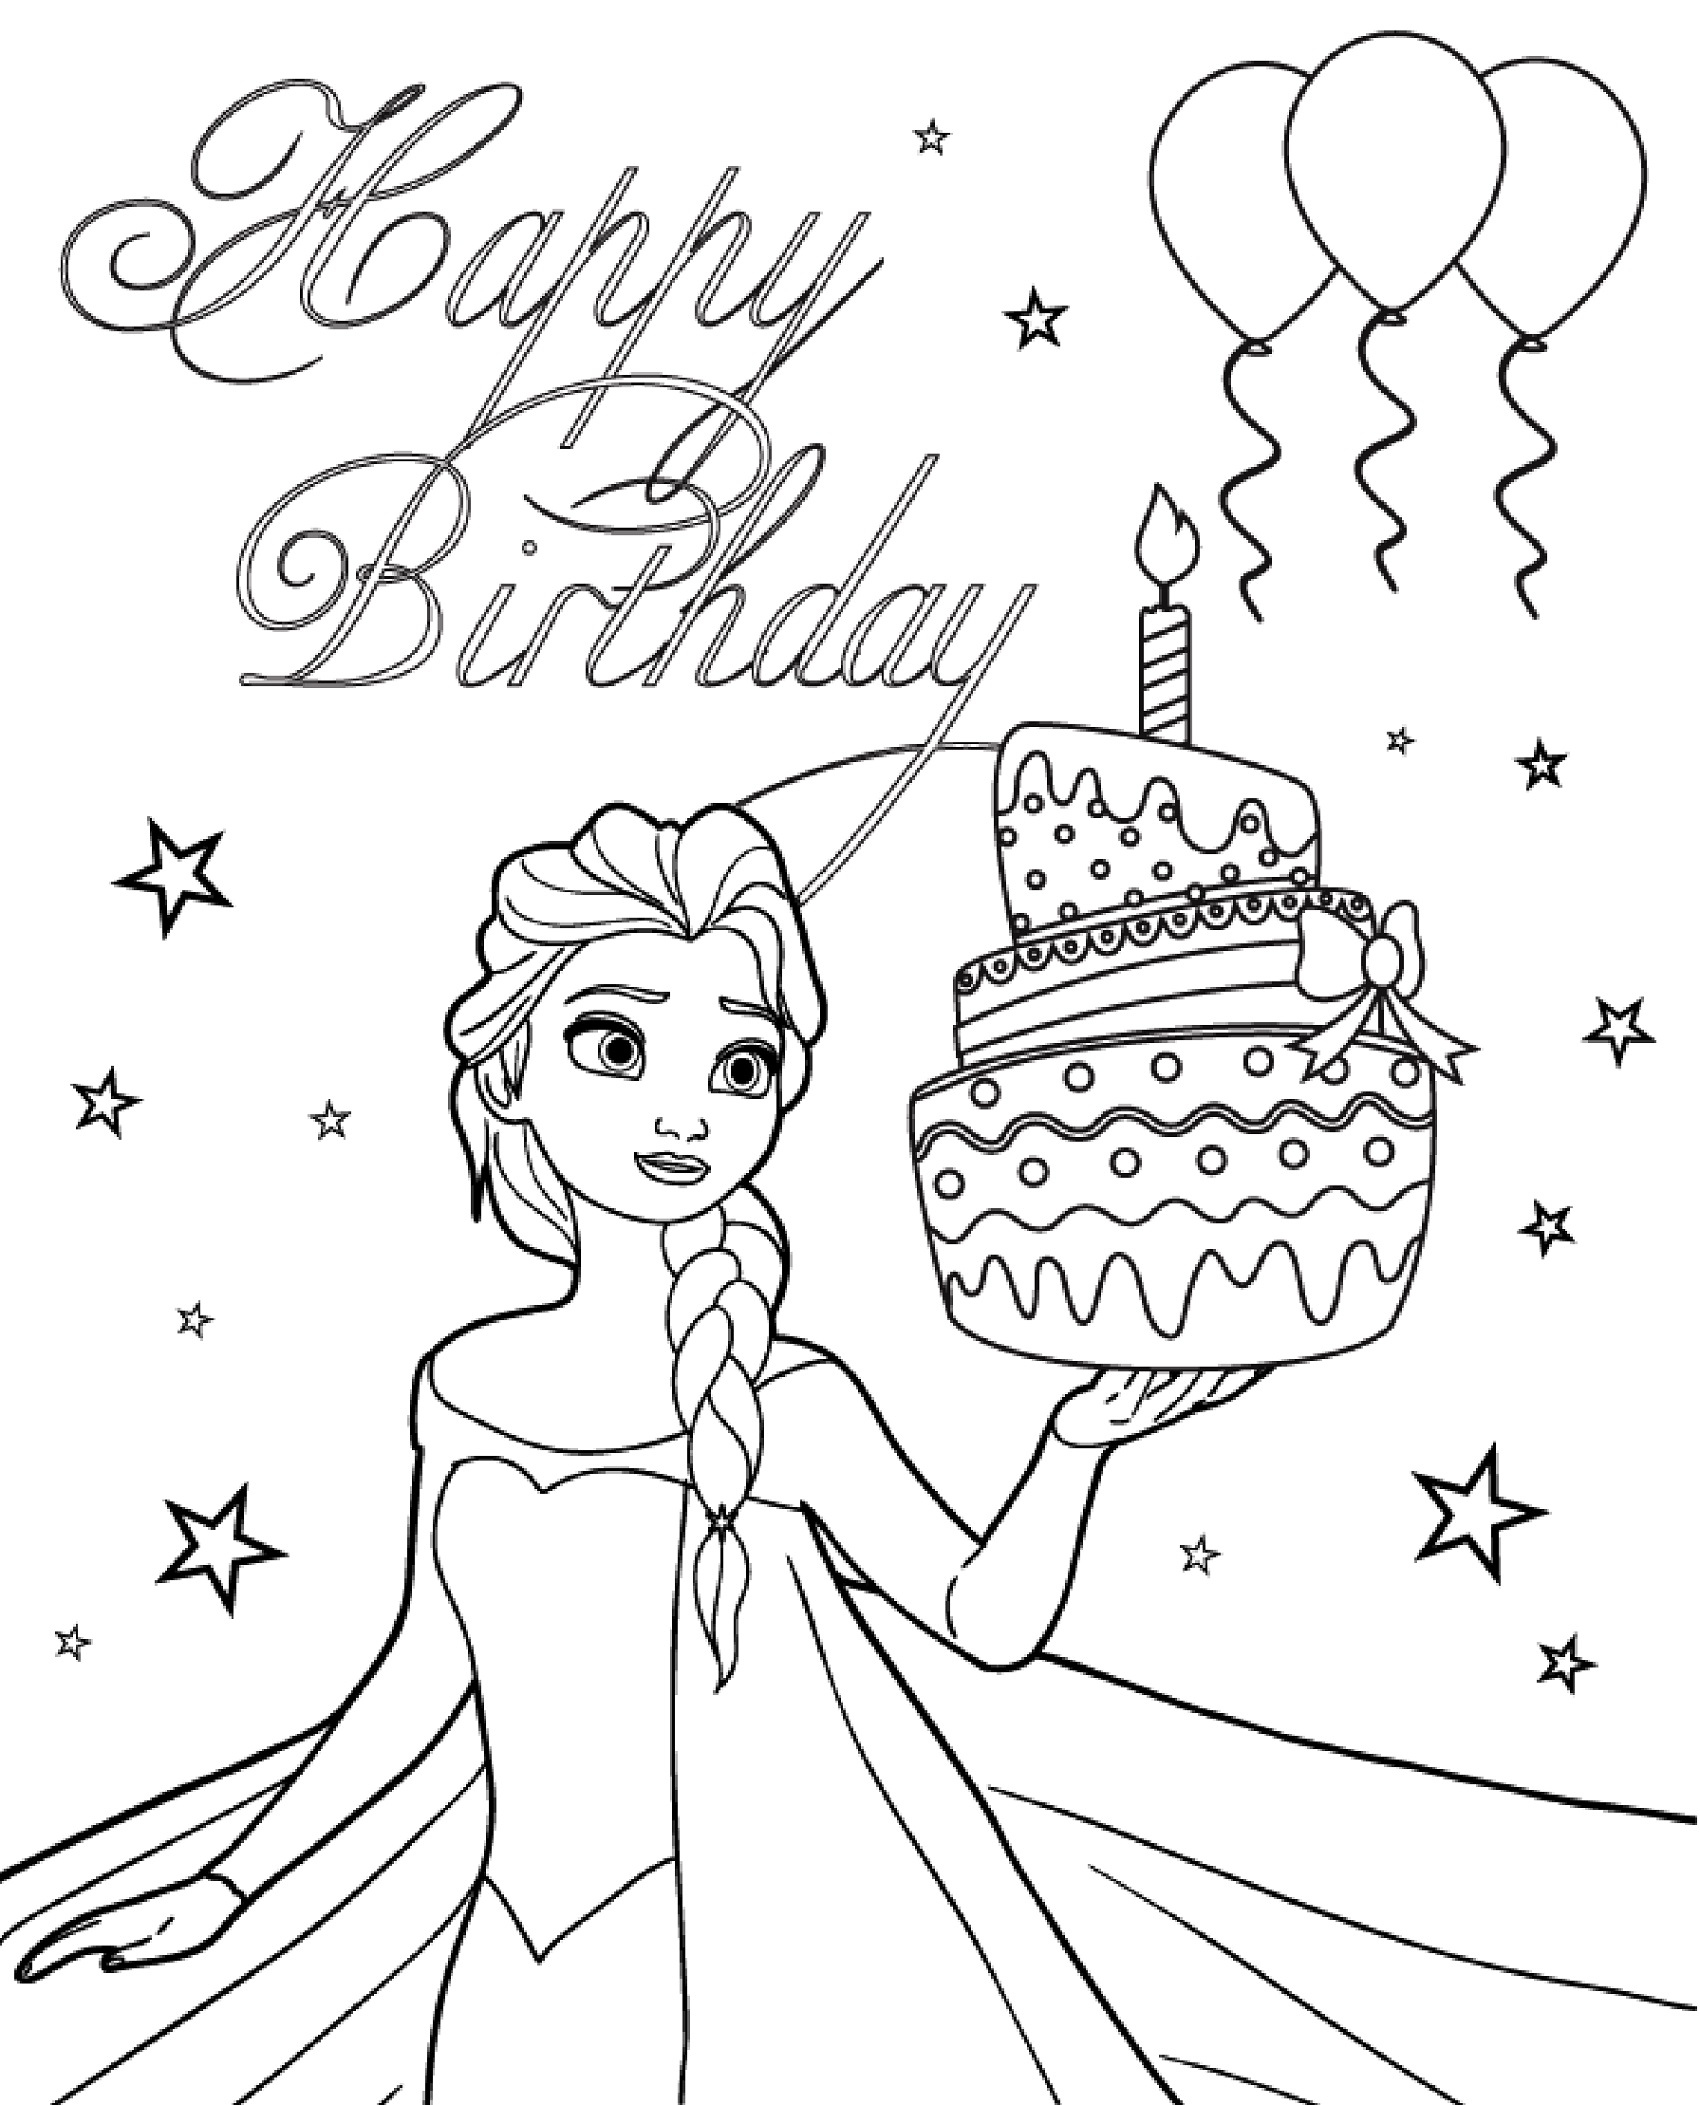 printable-birthday-card-coloring-pages-101-activity-free-printable-birthday-cards